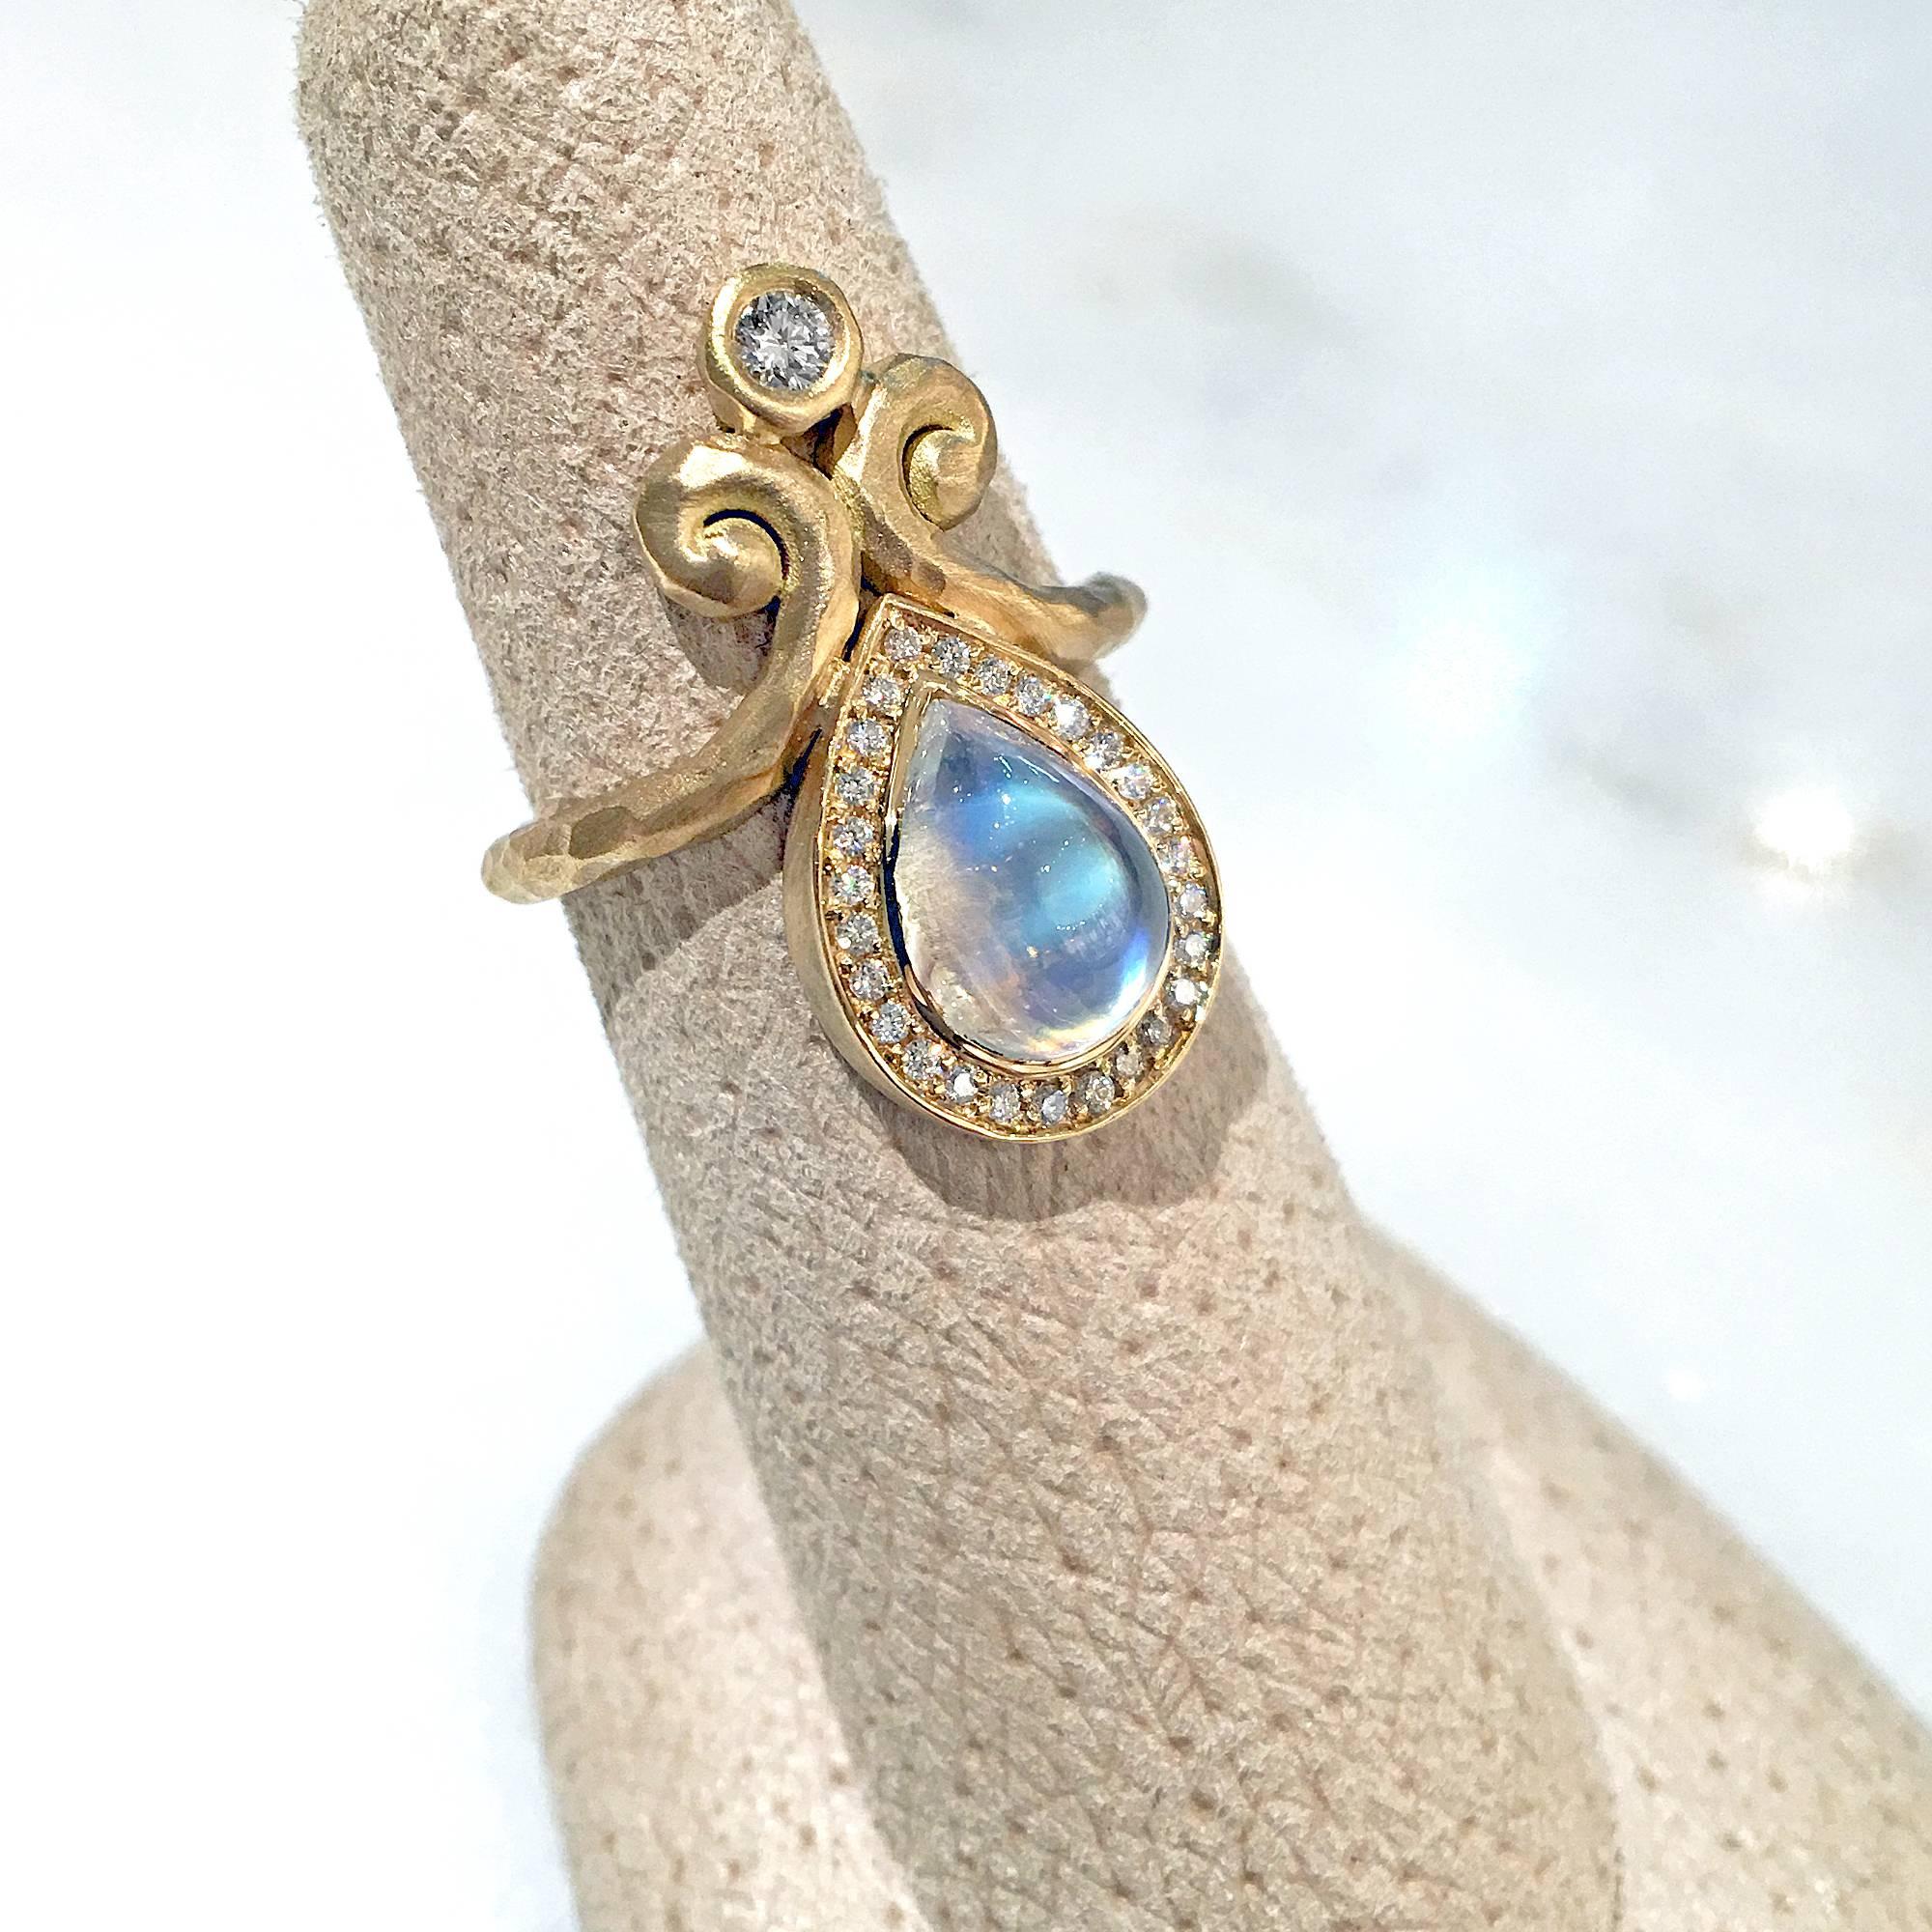 One of a Kind Ring handcrafted by jewelry designer Pamela Froman in hand-hammered 18k yellow gold featuring a spectacular 2.79 carat pear-shaped rainbow moonstone cabochon surrounded by a pave' diamond bezel and accented with a substantial round